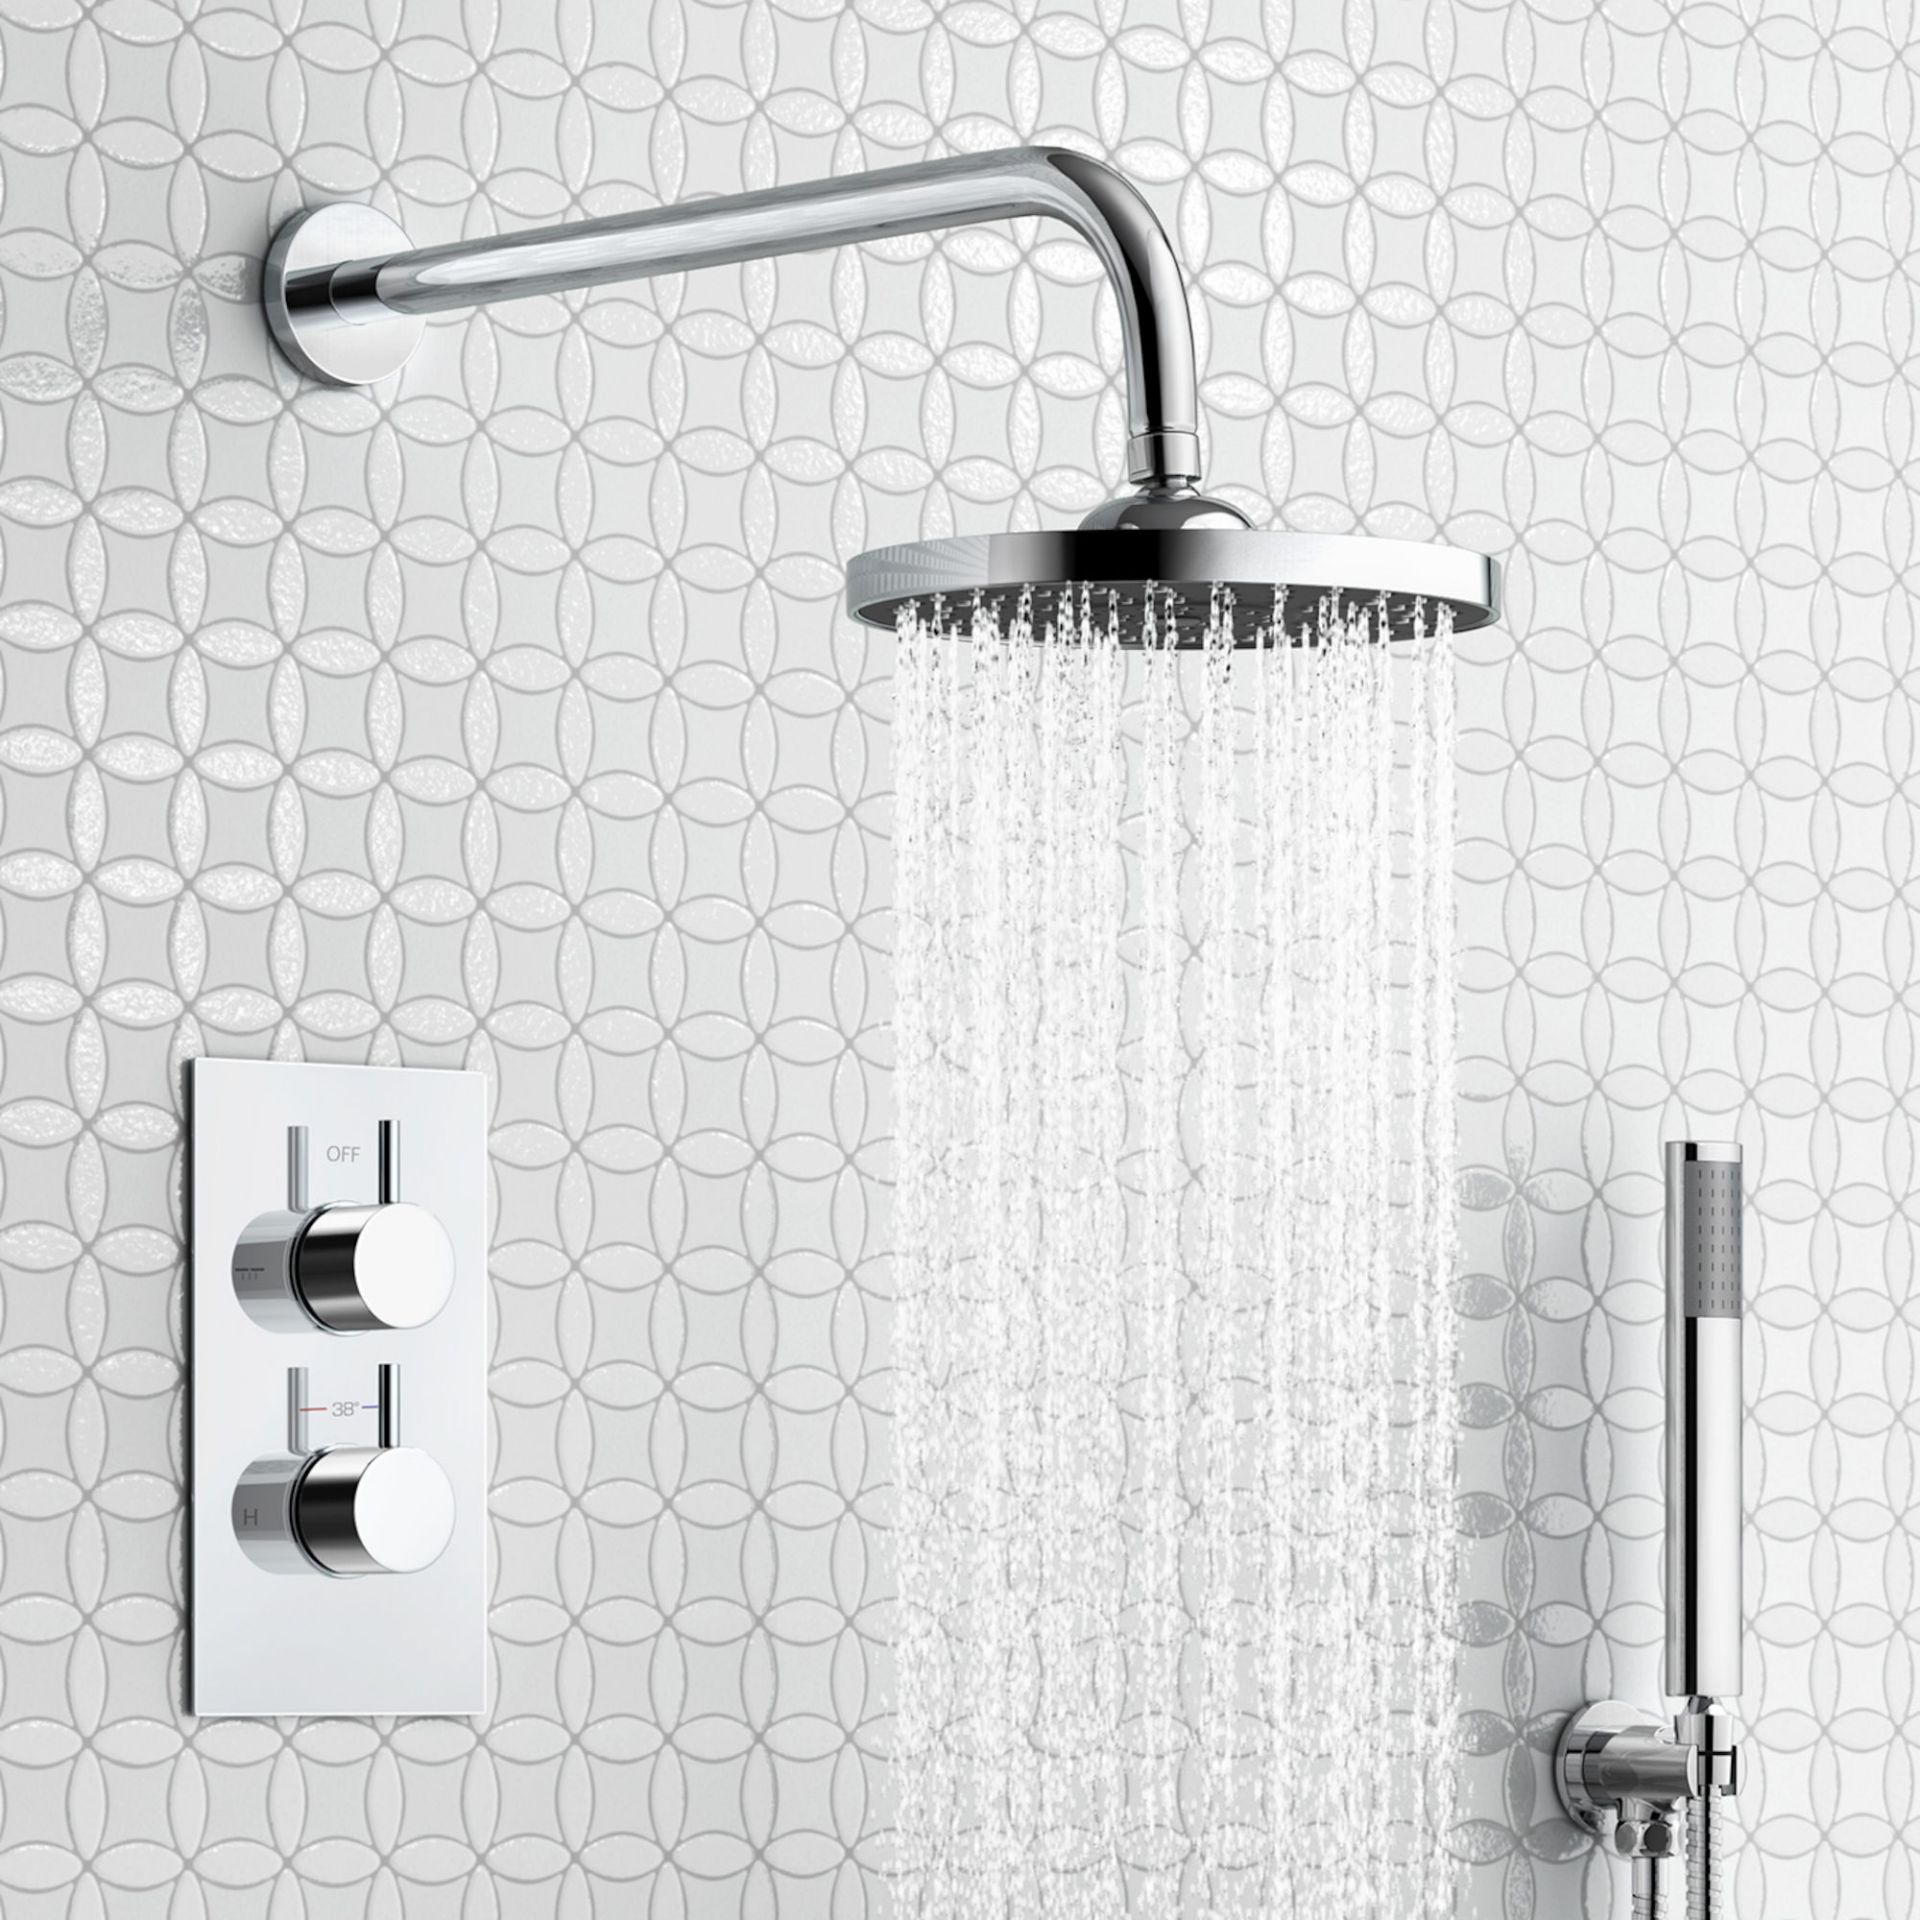 (DK49) Round Concealed Thermostatic Mixer Shower Kit & Medium Head. Family friendly detachable